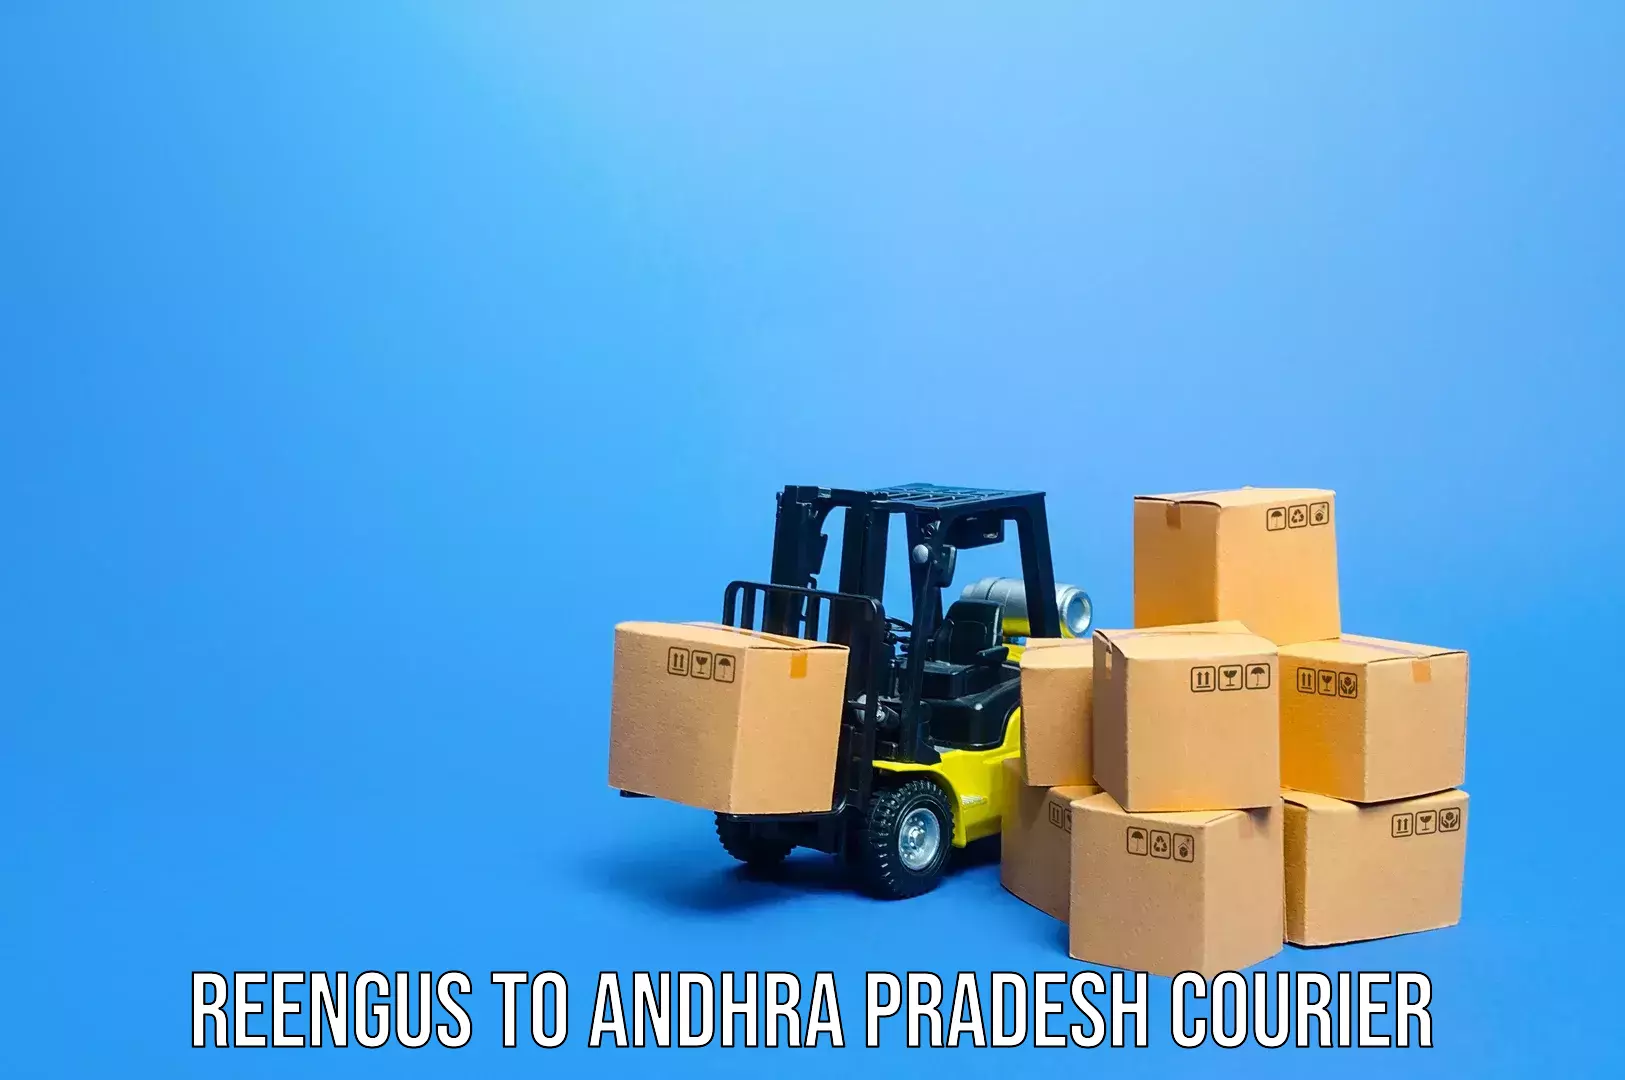 Luggage delivery logistics Reengus to Visakhapatnam